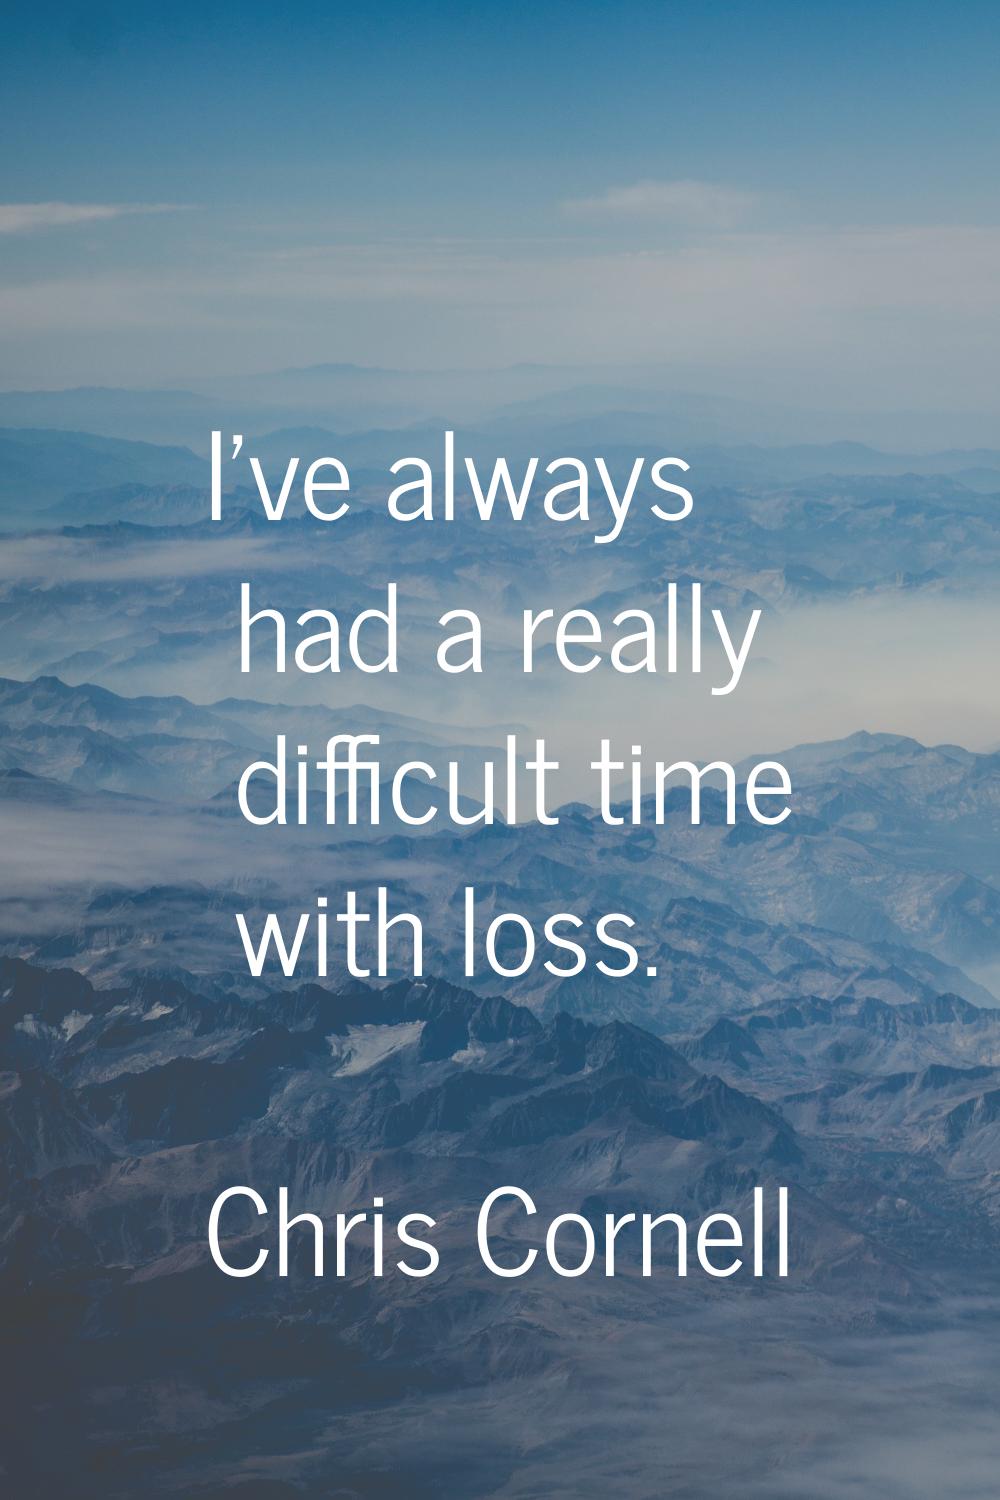 I've always had a really difficult time with loss.